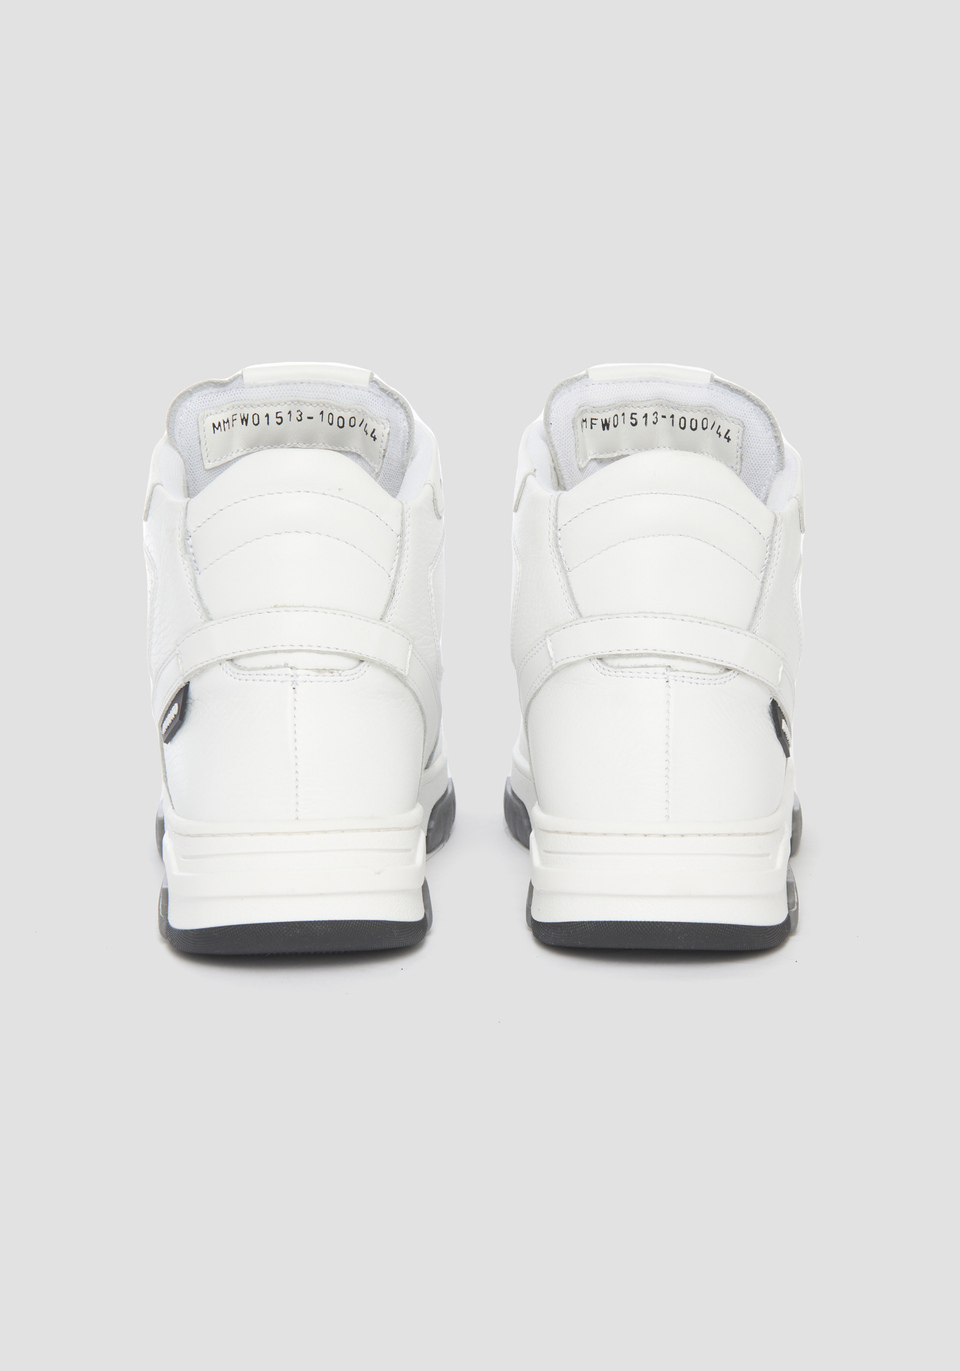 "KENDALL" MID SNEAKERS IN LEATHER - Antony Morato Online Shop